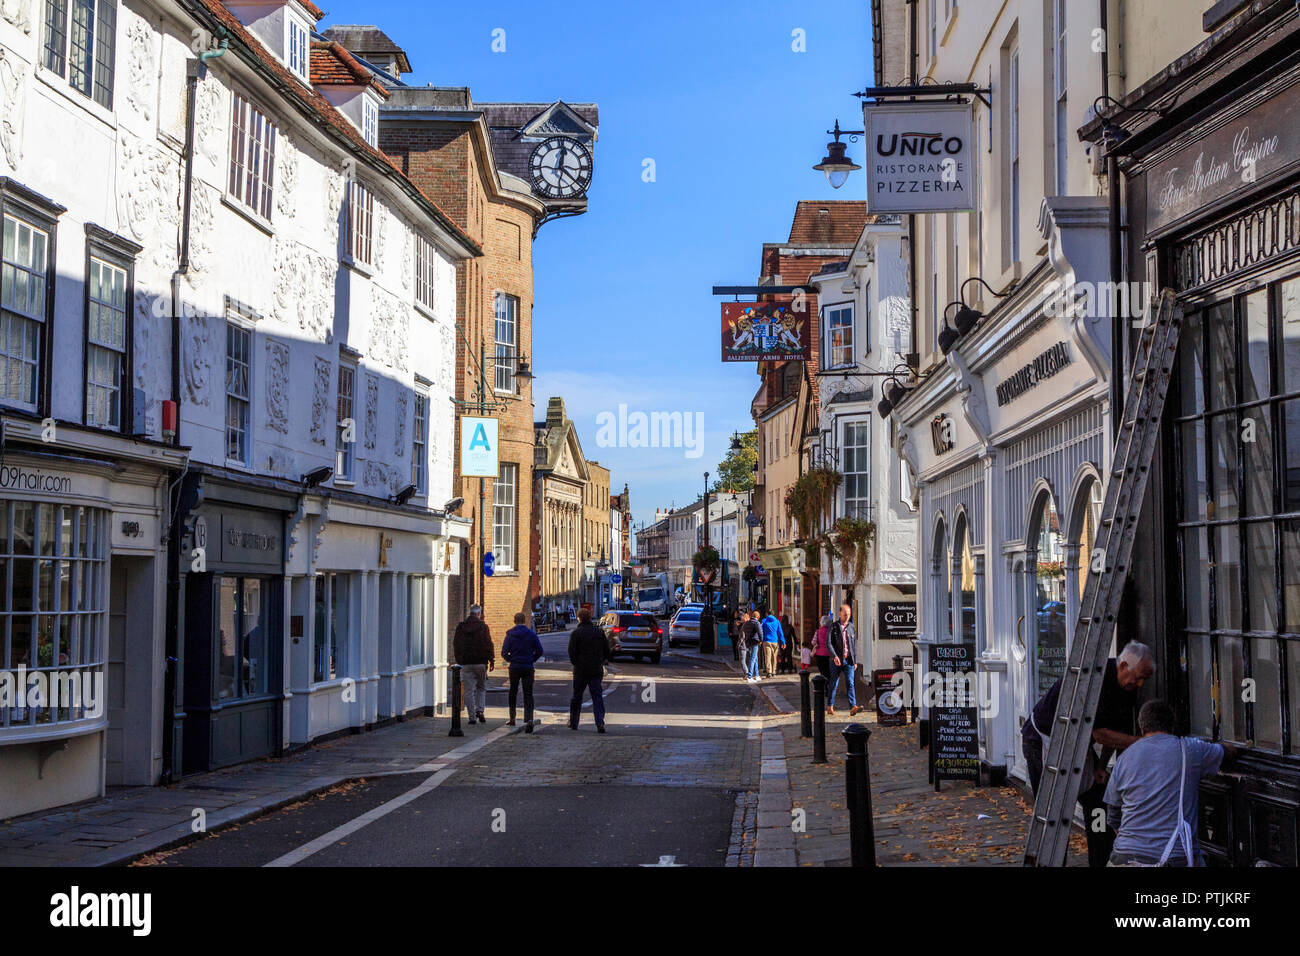 Hertford town centre shopping and attractions, the county town of Hertfordshire, England Stock Photo